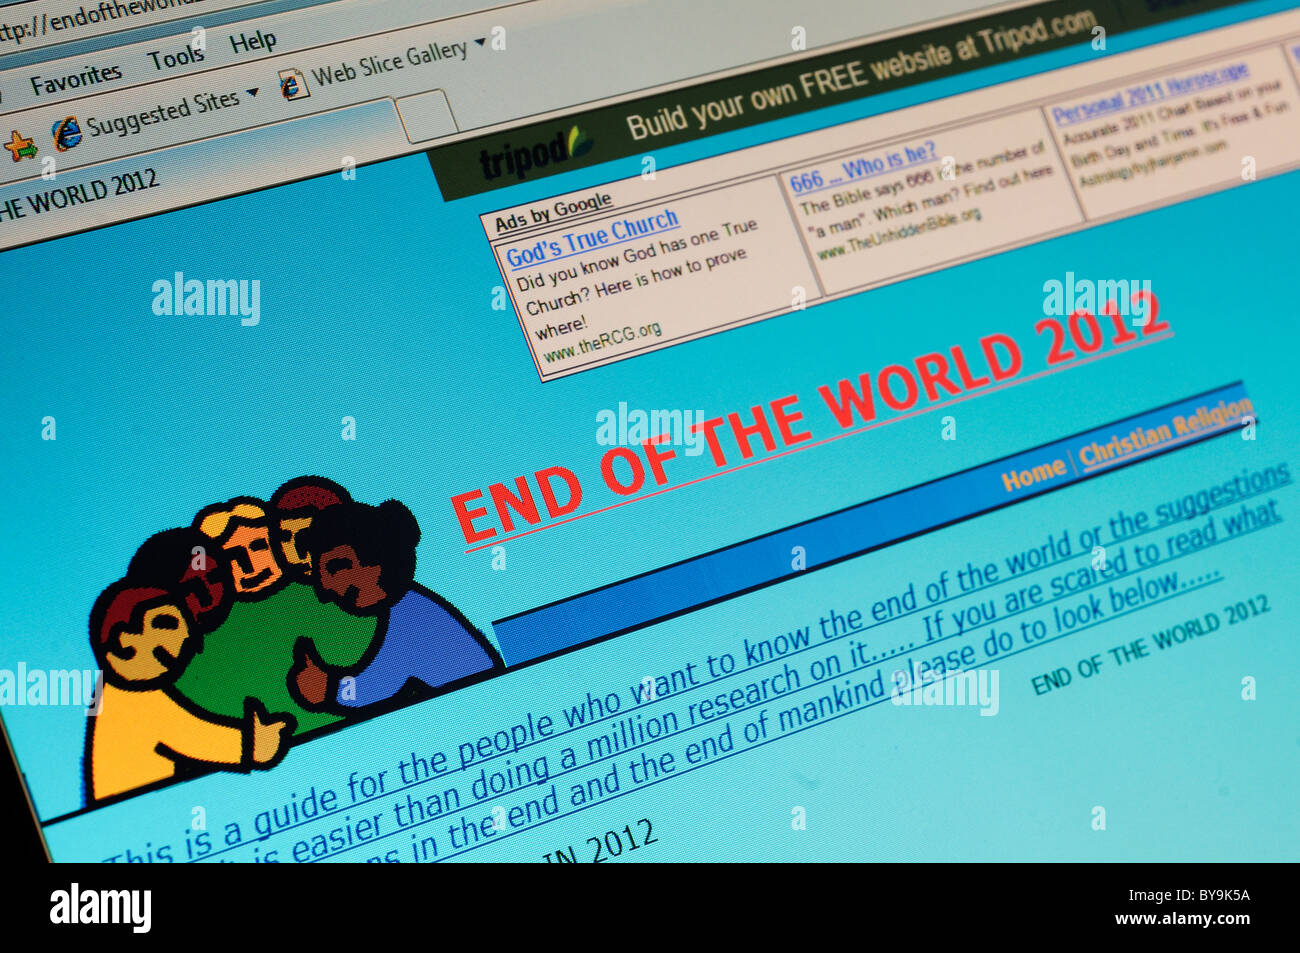 A website for the end of the world in december 2012 Stock Photo